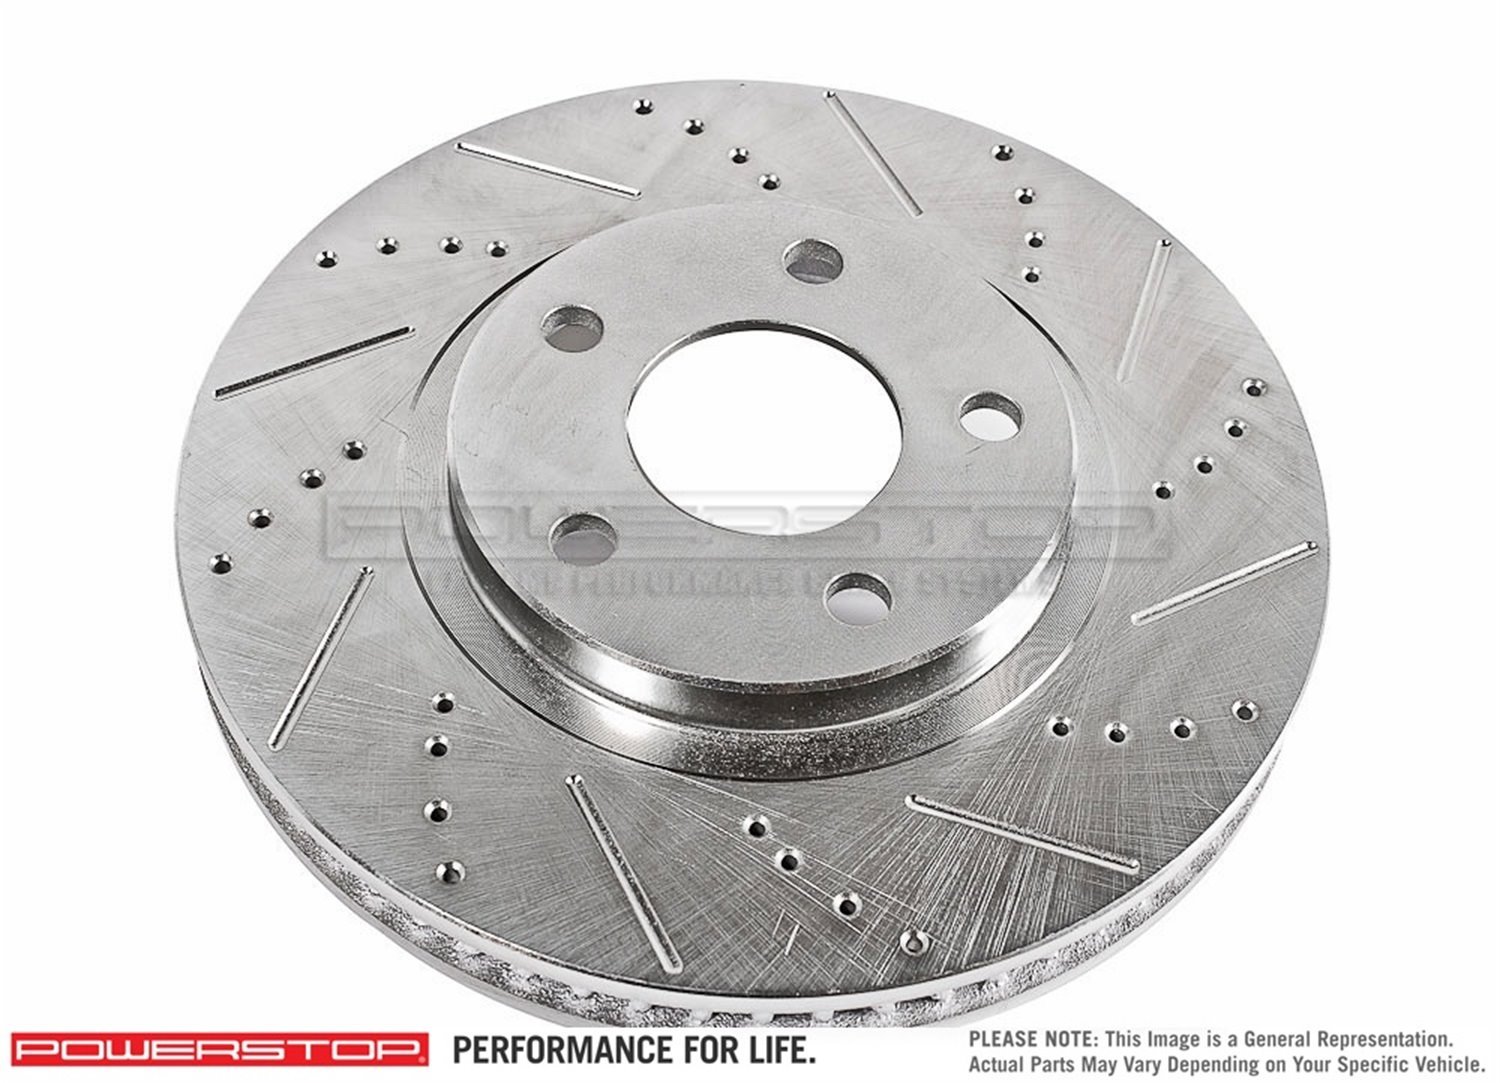 Extreme Performance Drilled And Slotted Rear Brake Rotor Fits Select Chrysler, Dodge Models [Right/Passenger Side]